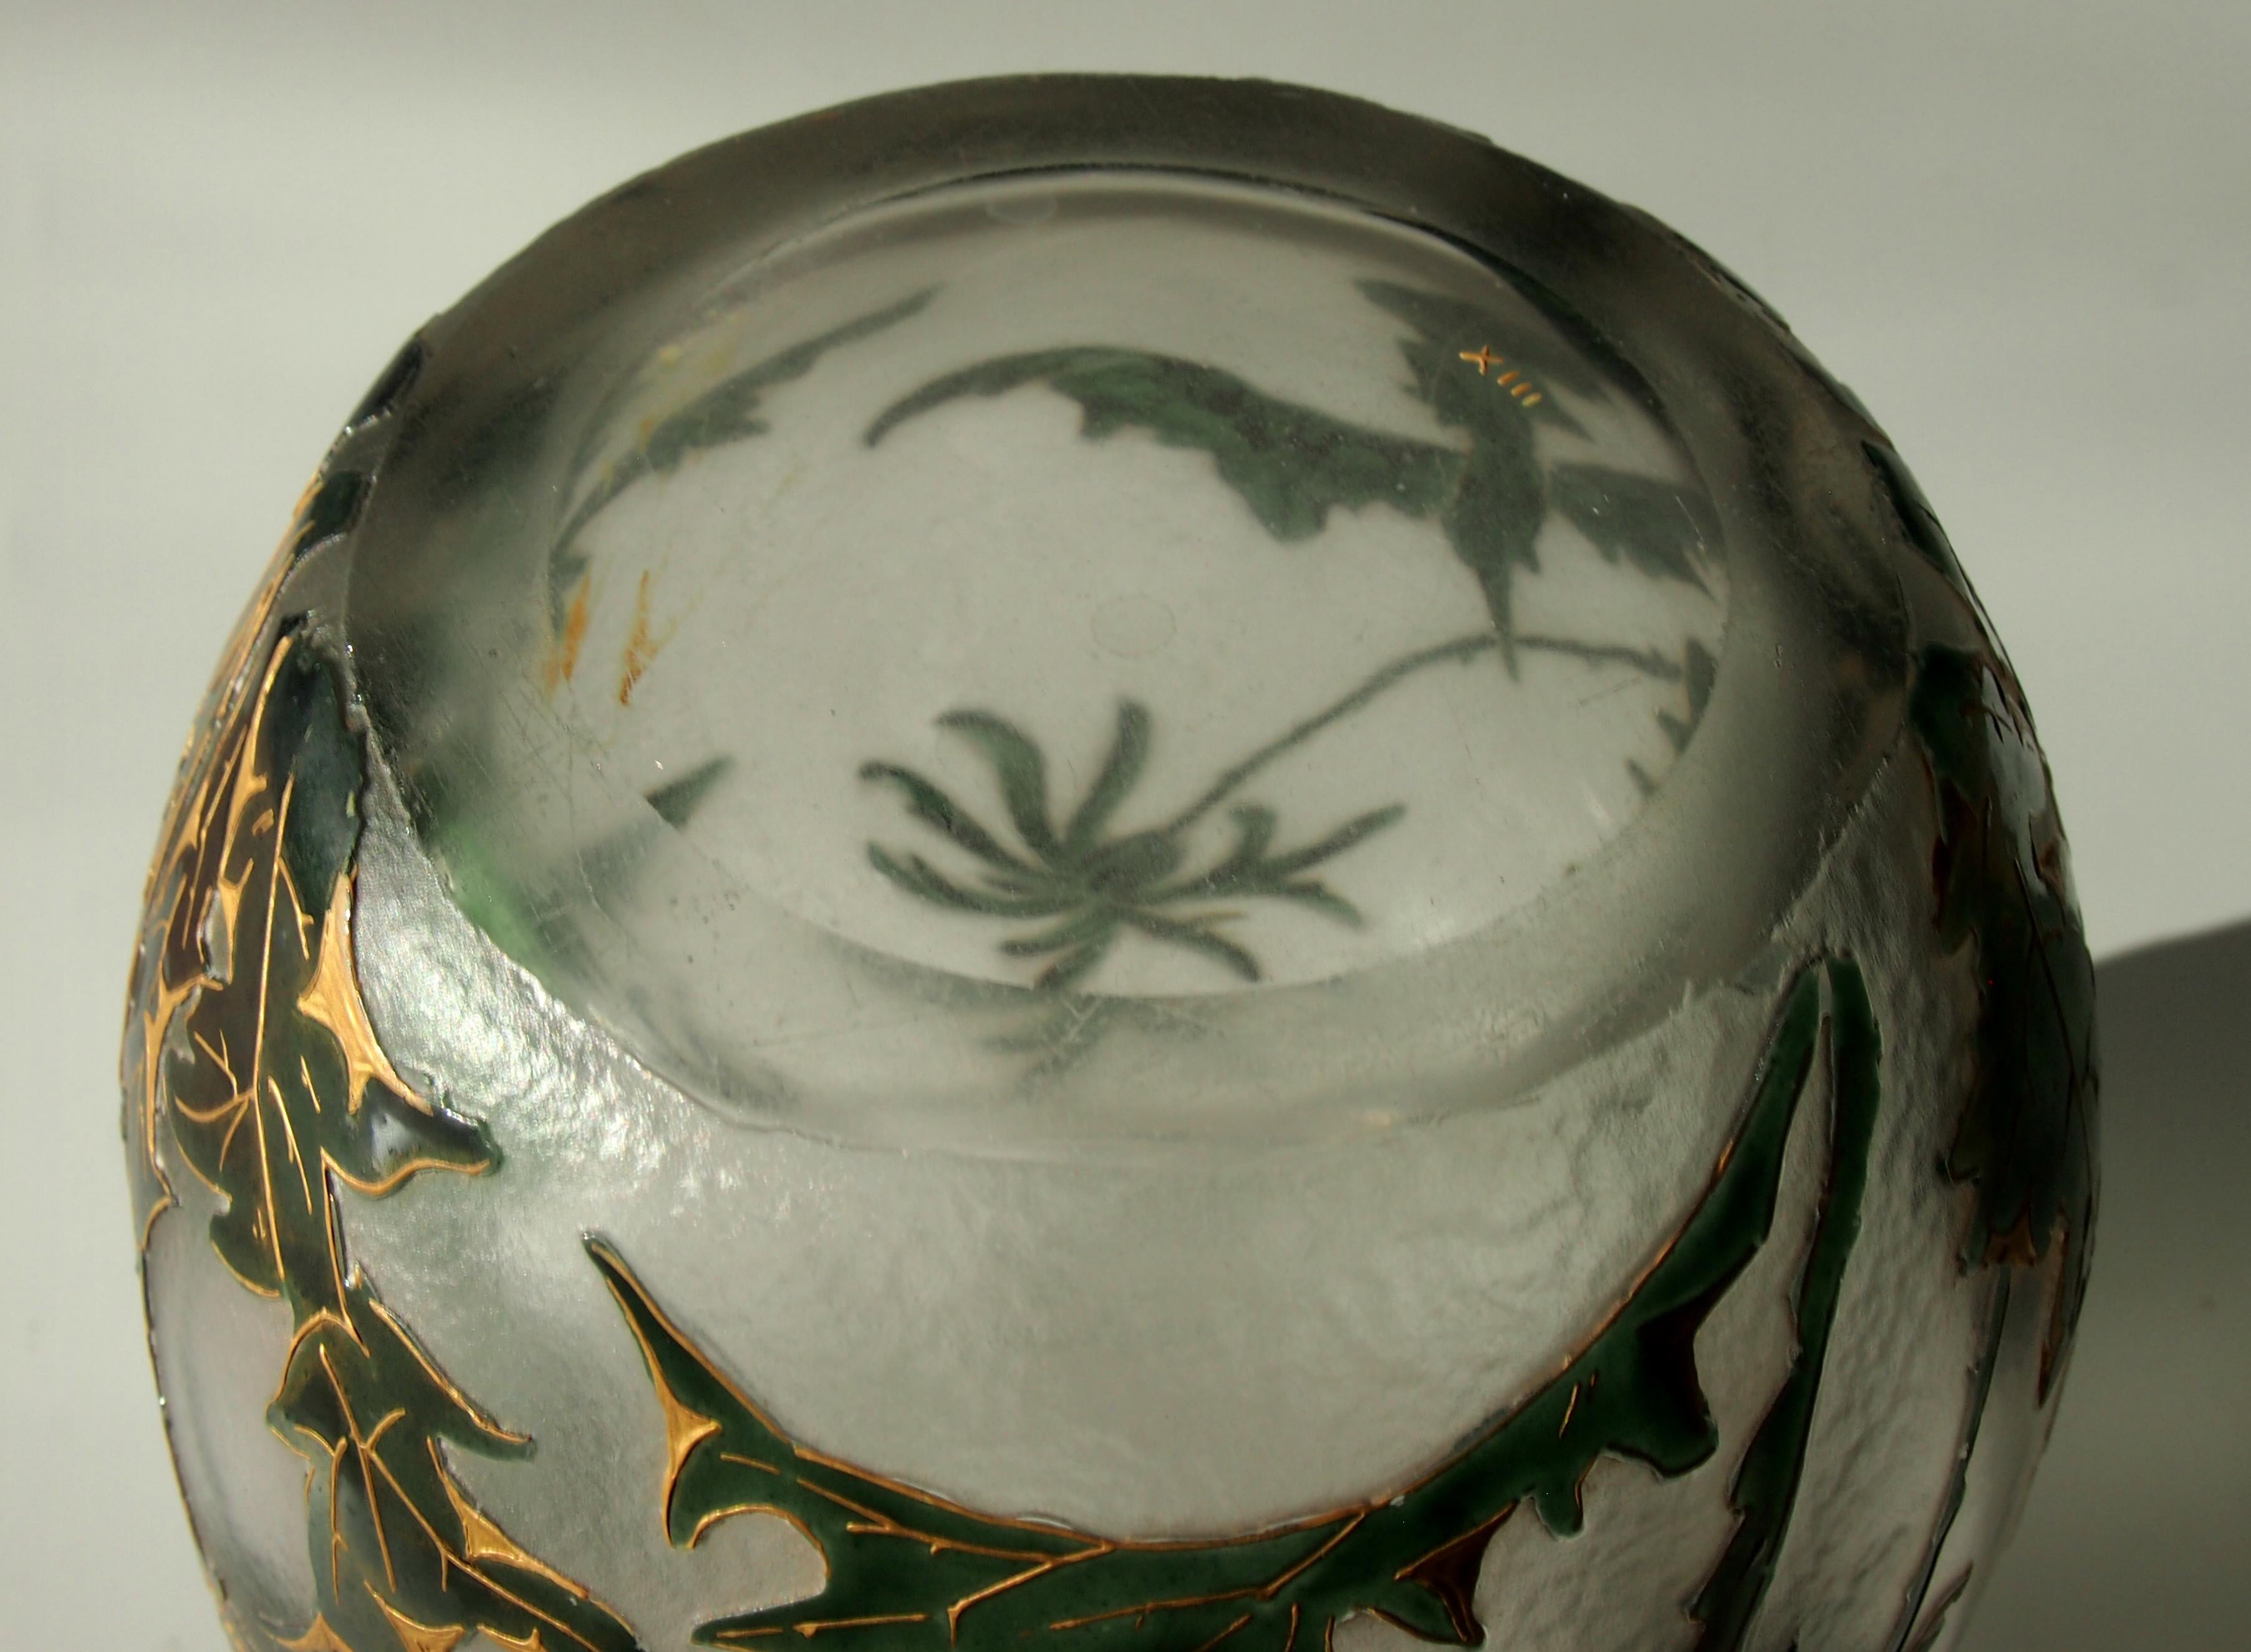 Late 19th Century French Art Nouveau Legras Enamel and Gilded Glass Vase For Sale